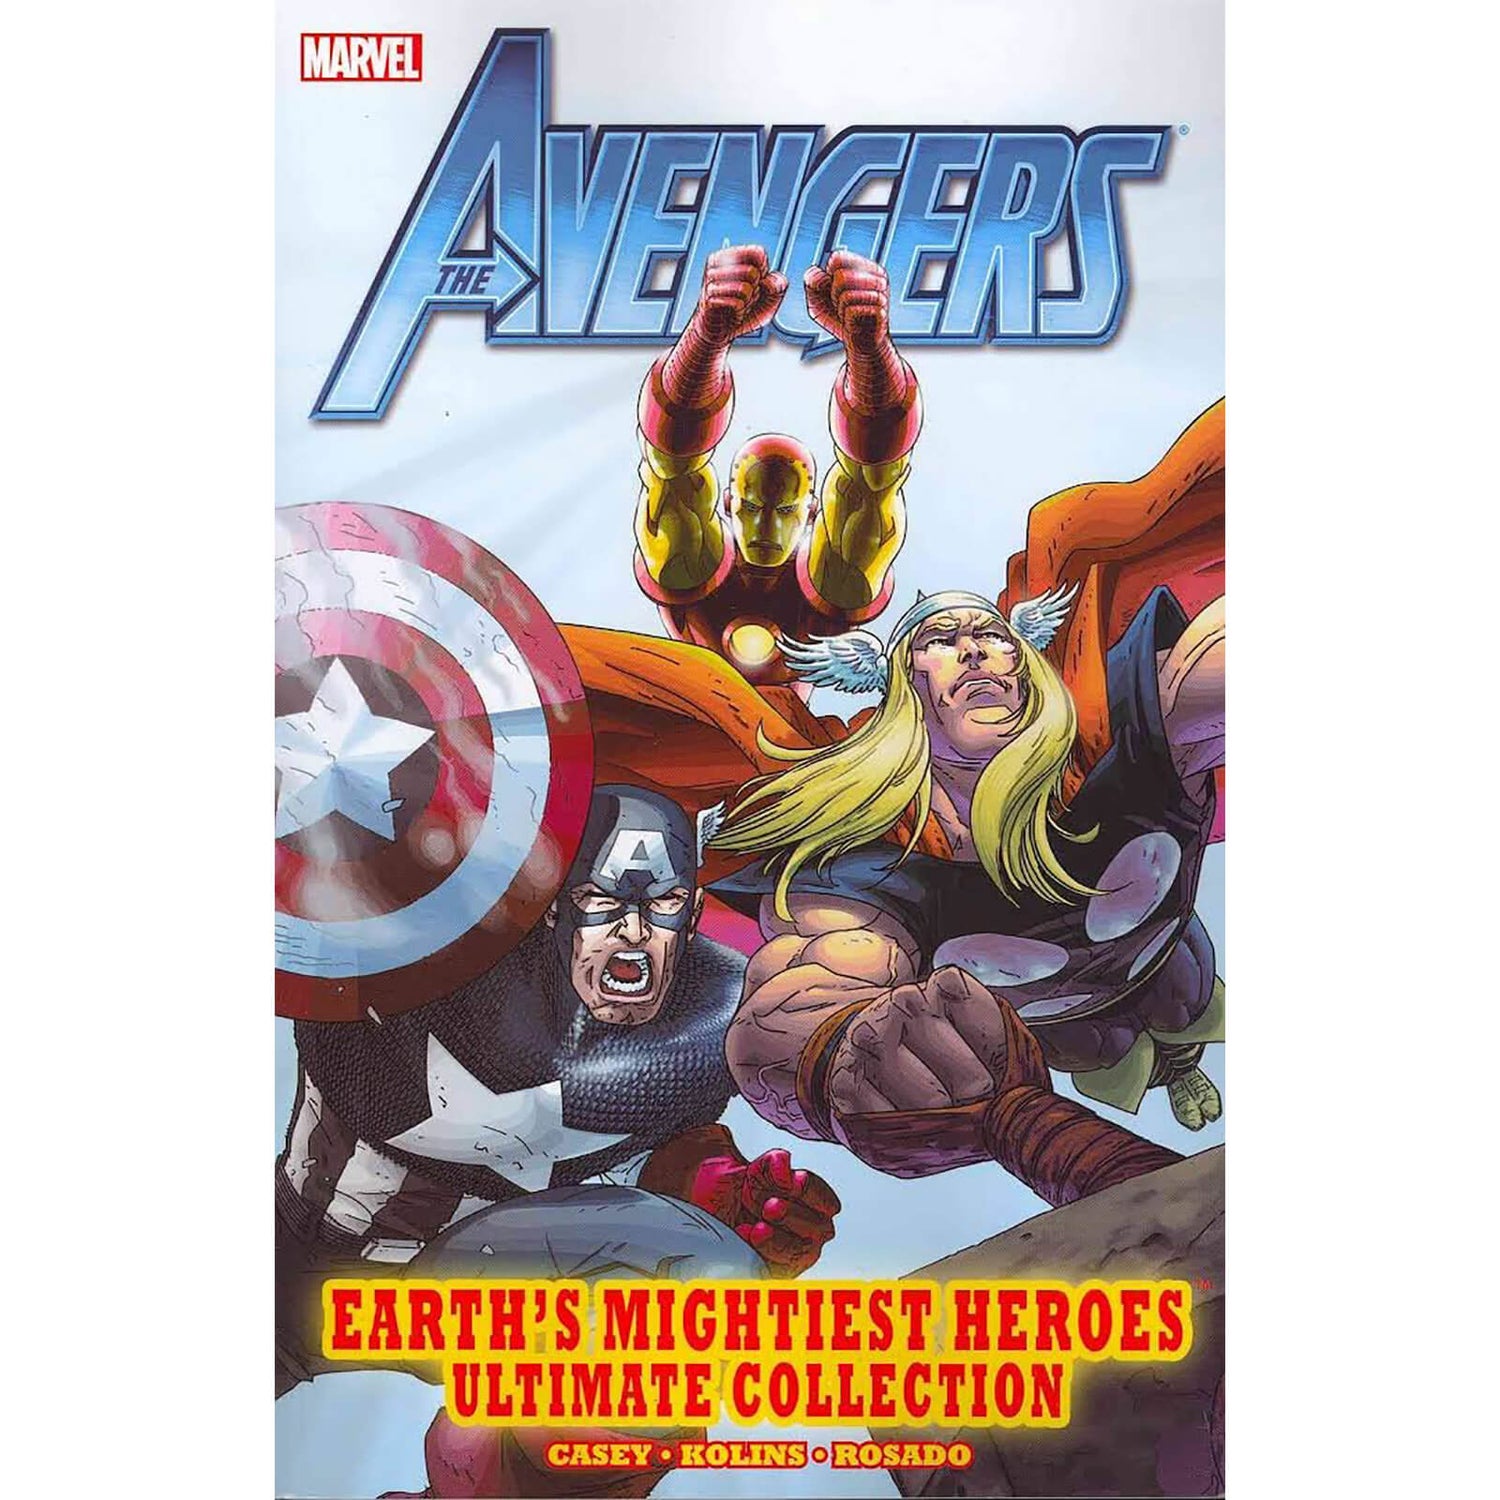 Marvel Avengers : Earth's Mightiest Heroes Ultimate Collection Roman graphique Broché